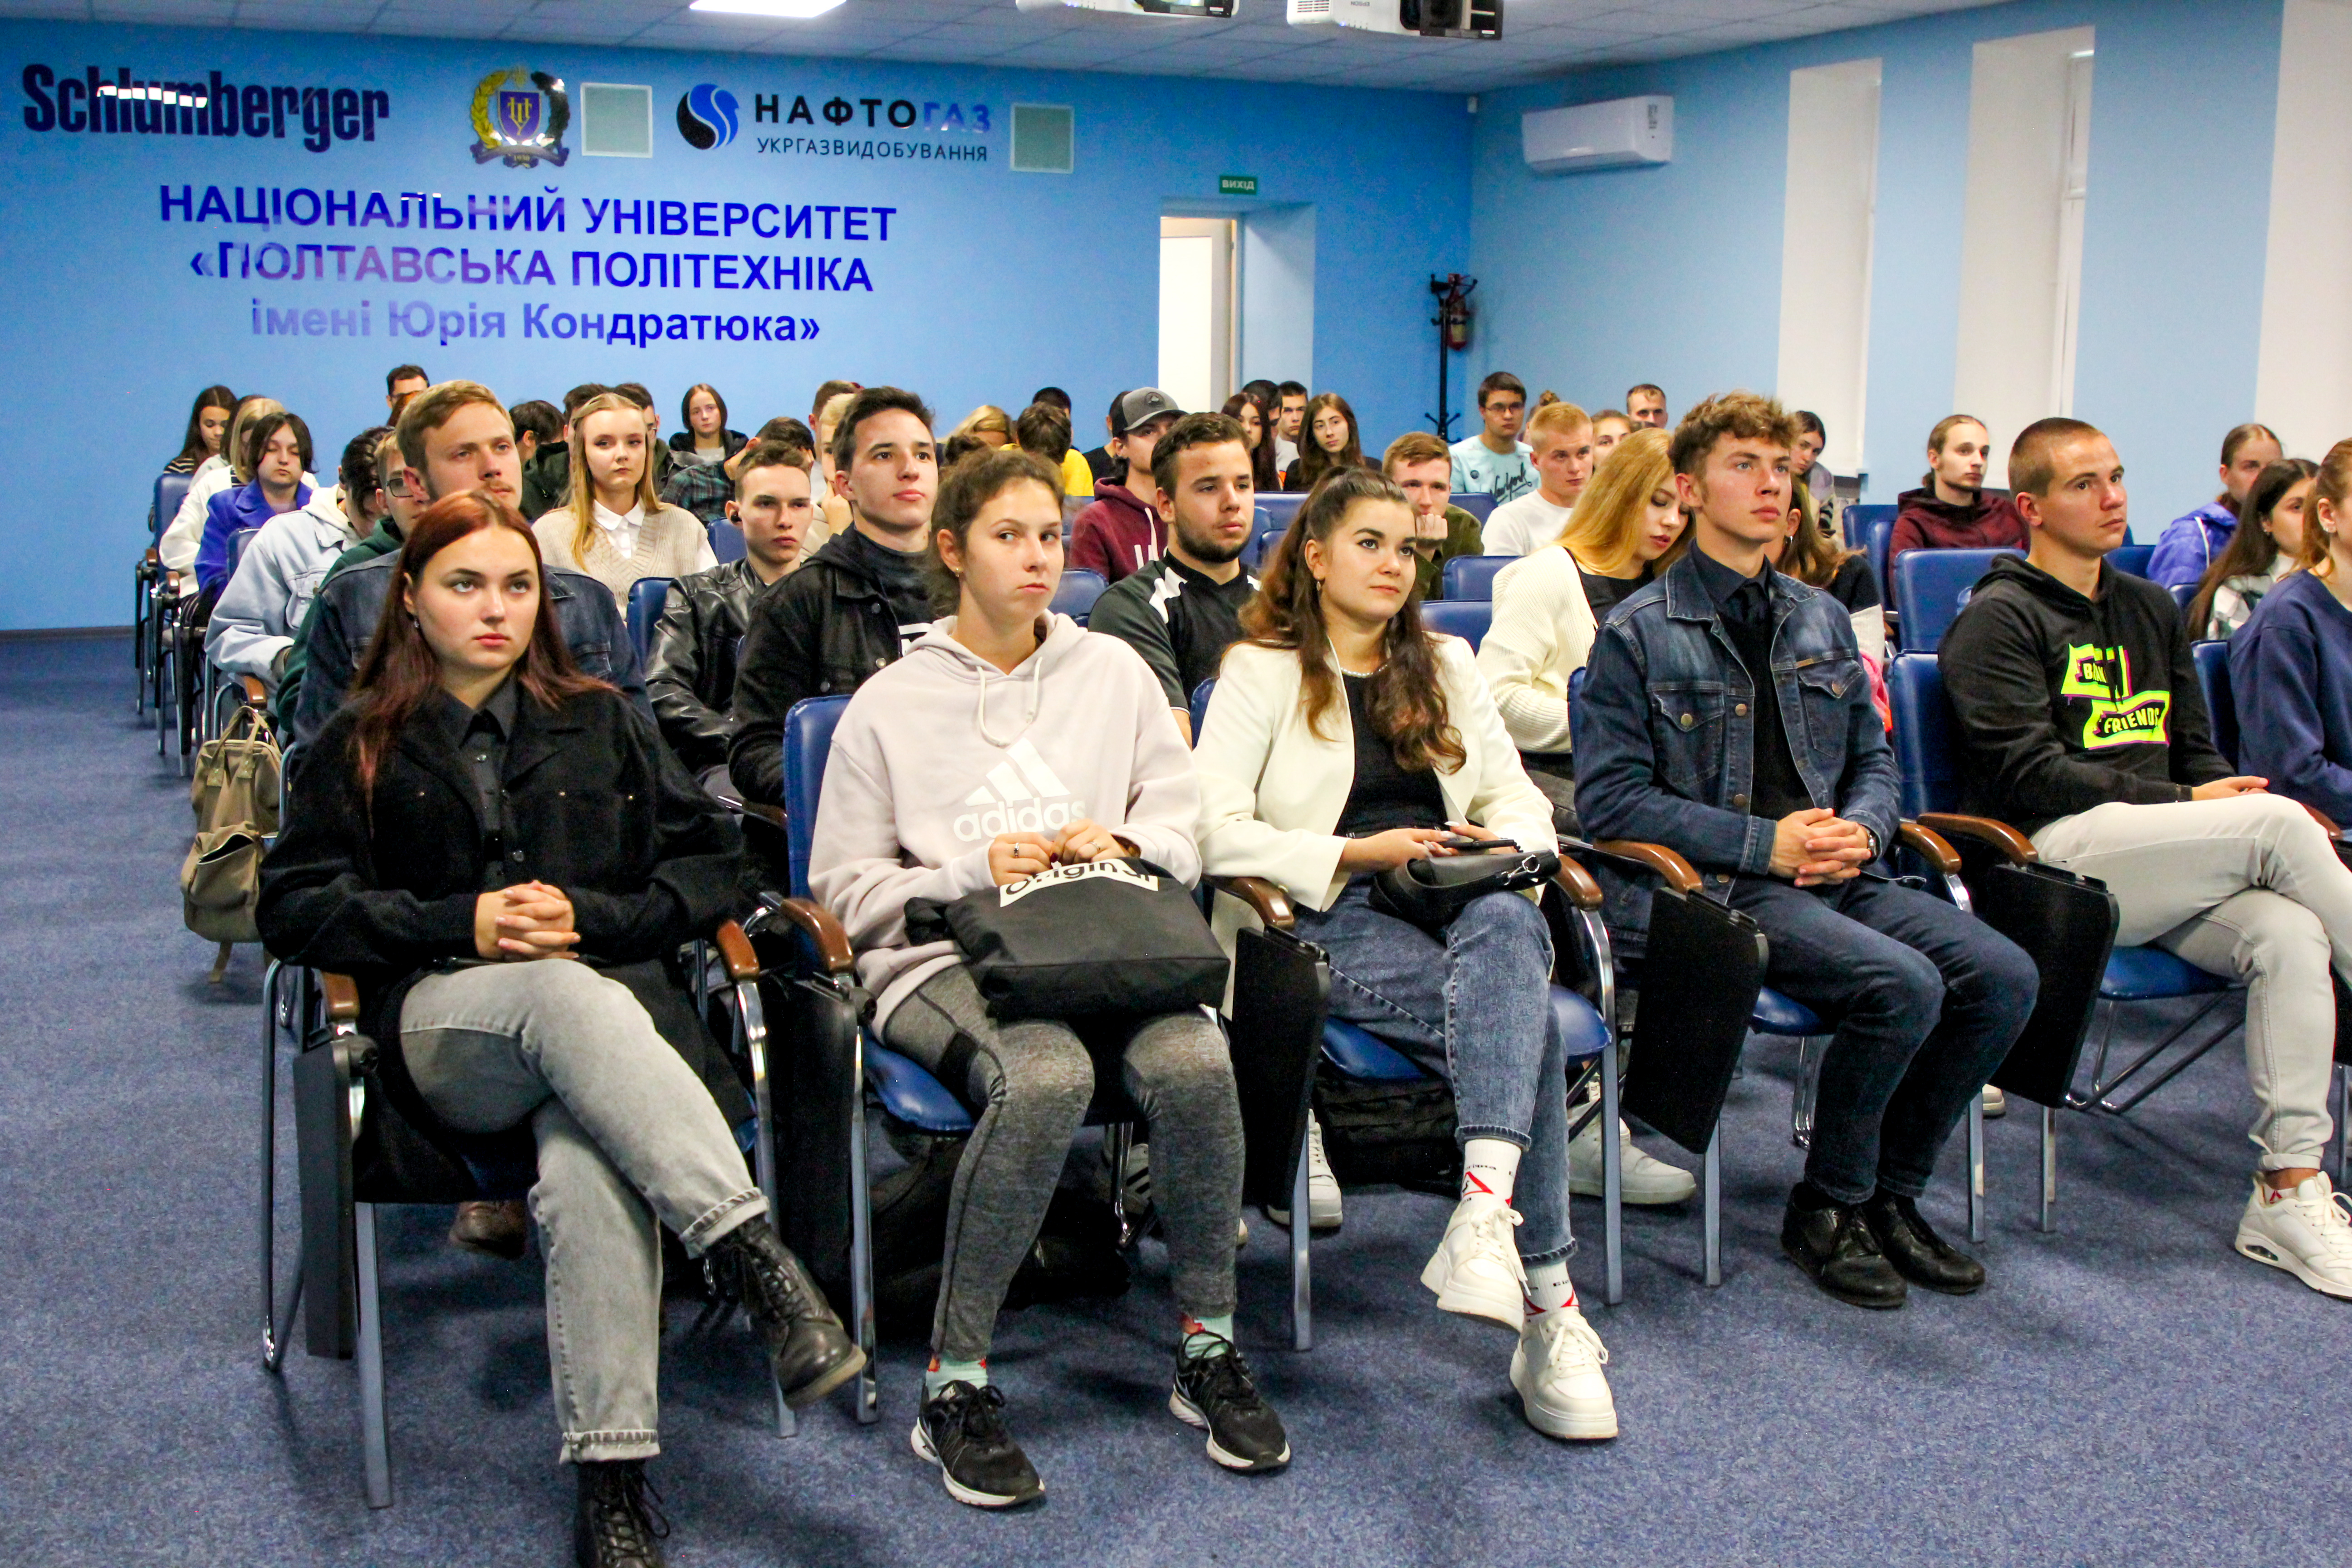 Students attend an all-Ukrainian public lecture by NACP on integrity and combating corruption